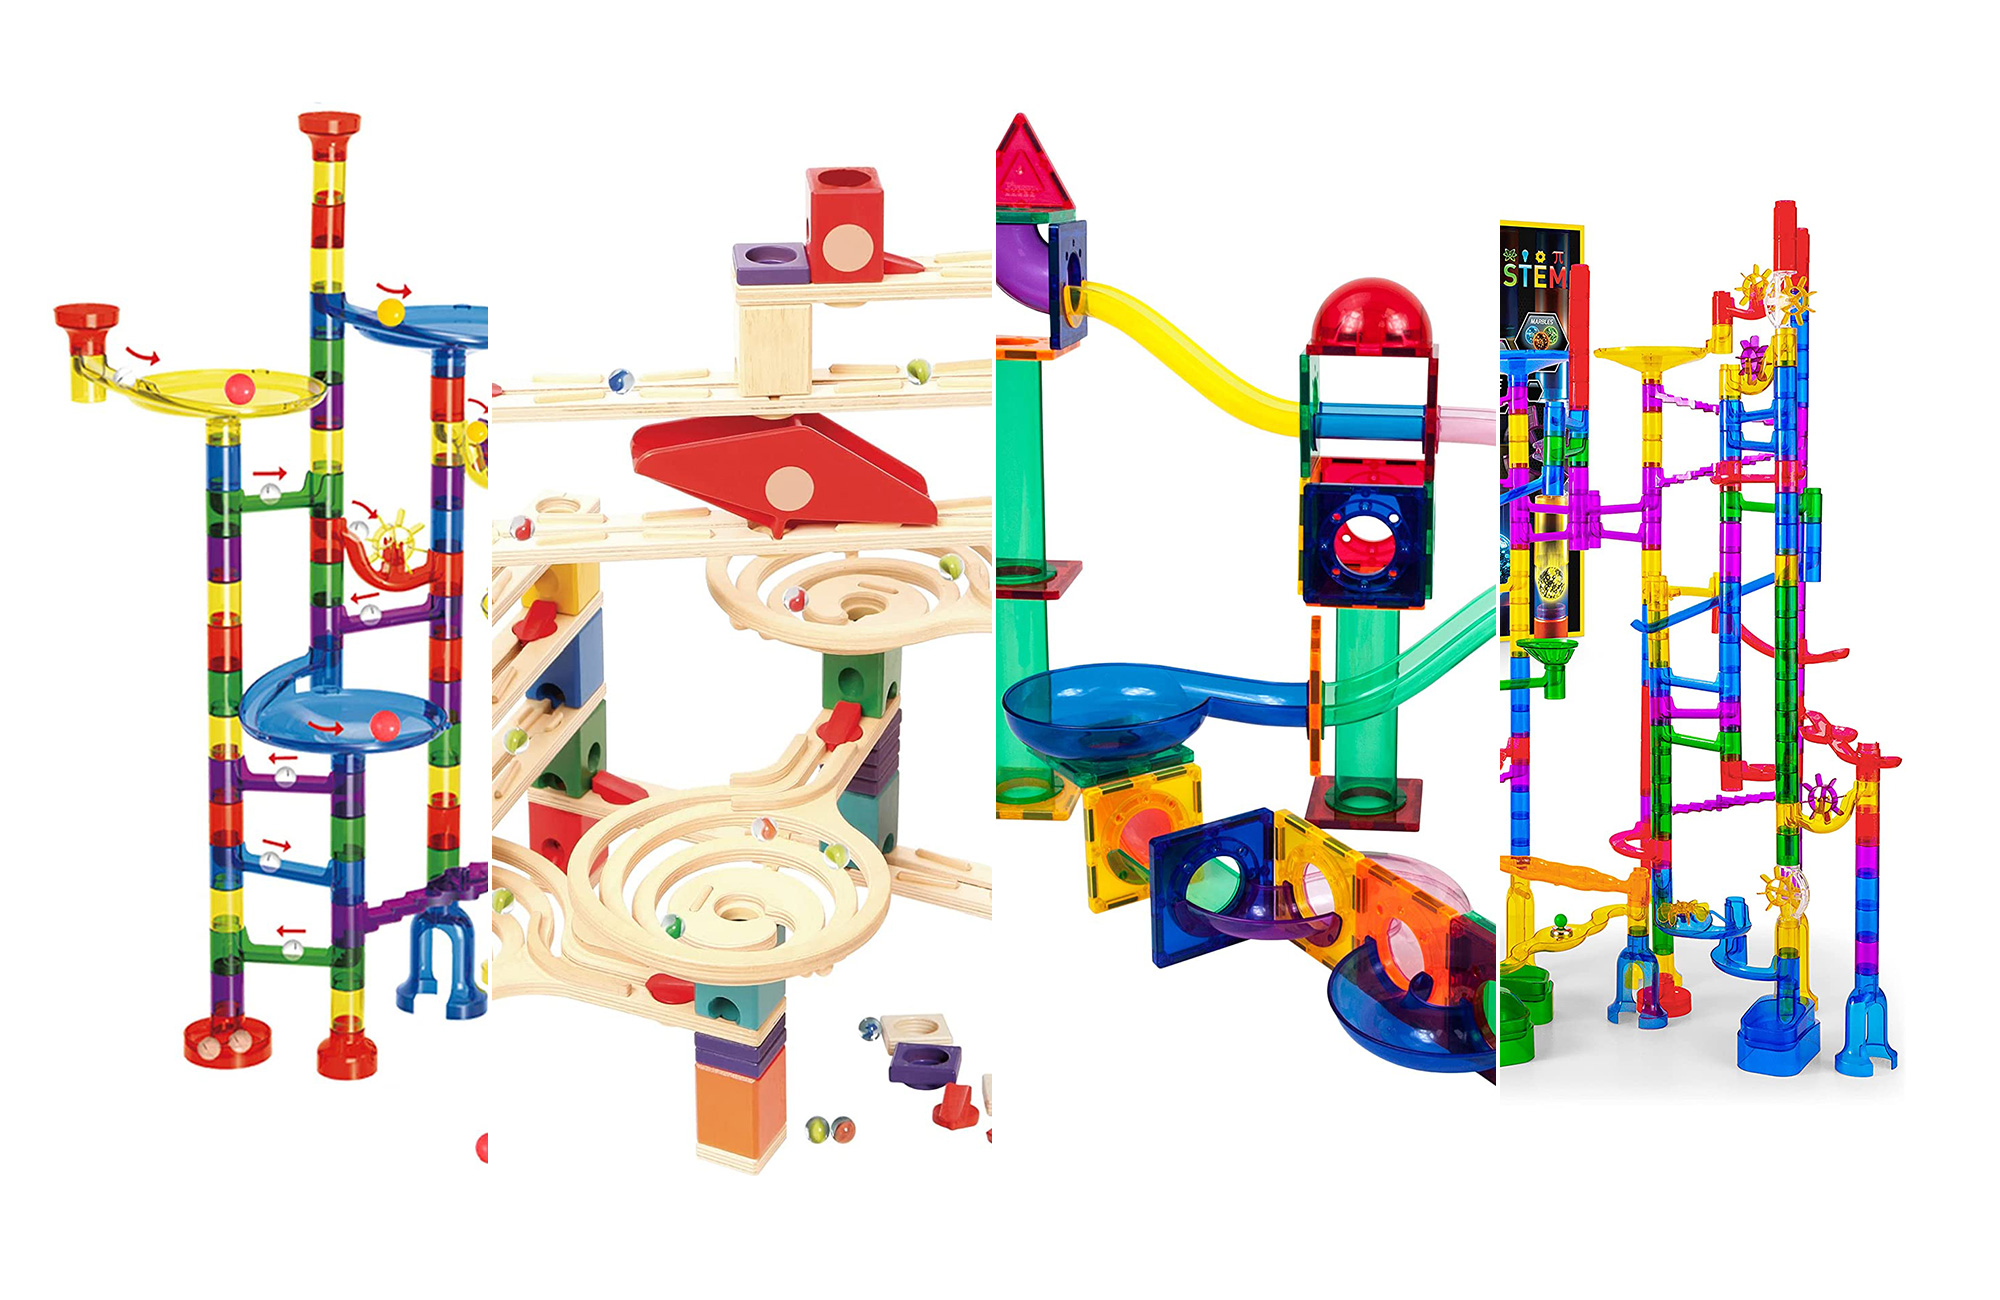 The best marble runs for fun at any age